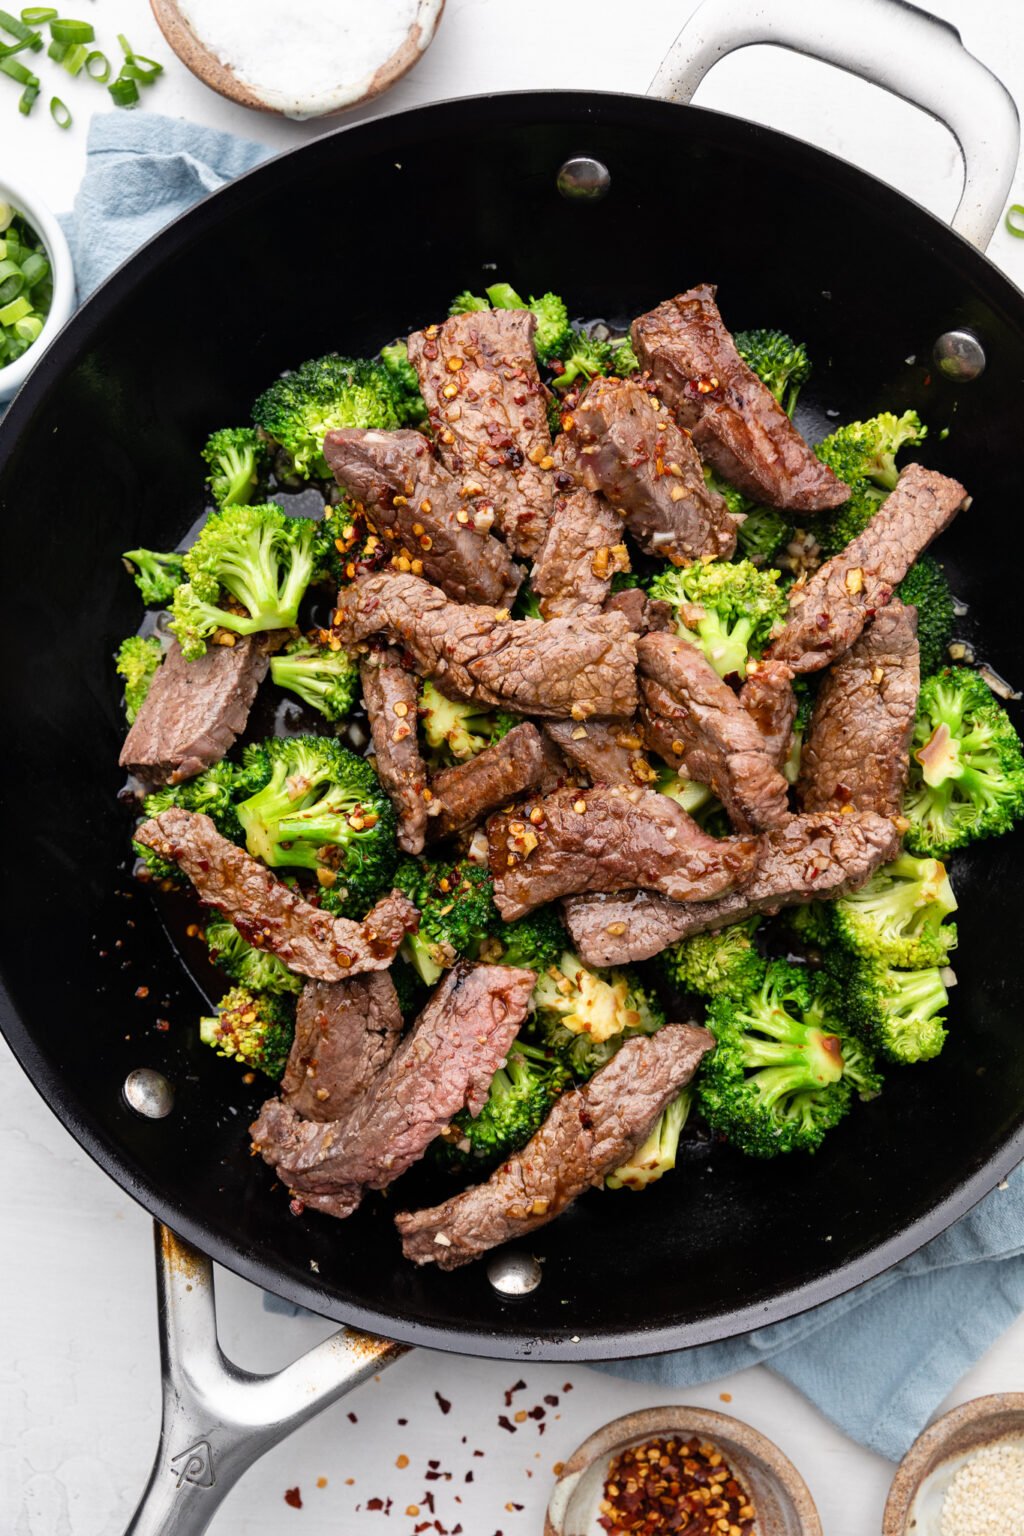 Healthy Beef and Broccoli Stir Fry - All the Healthy Things